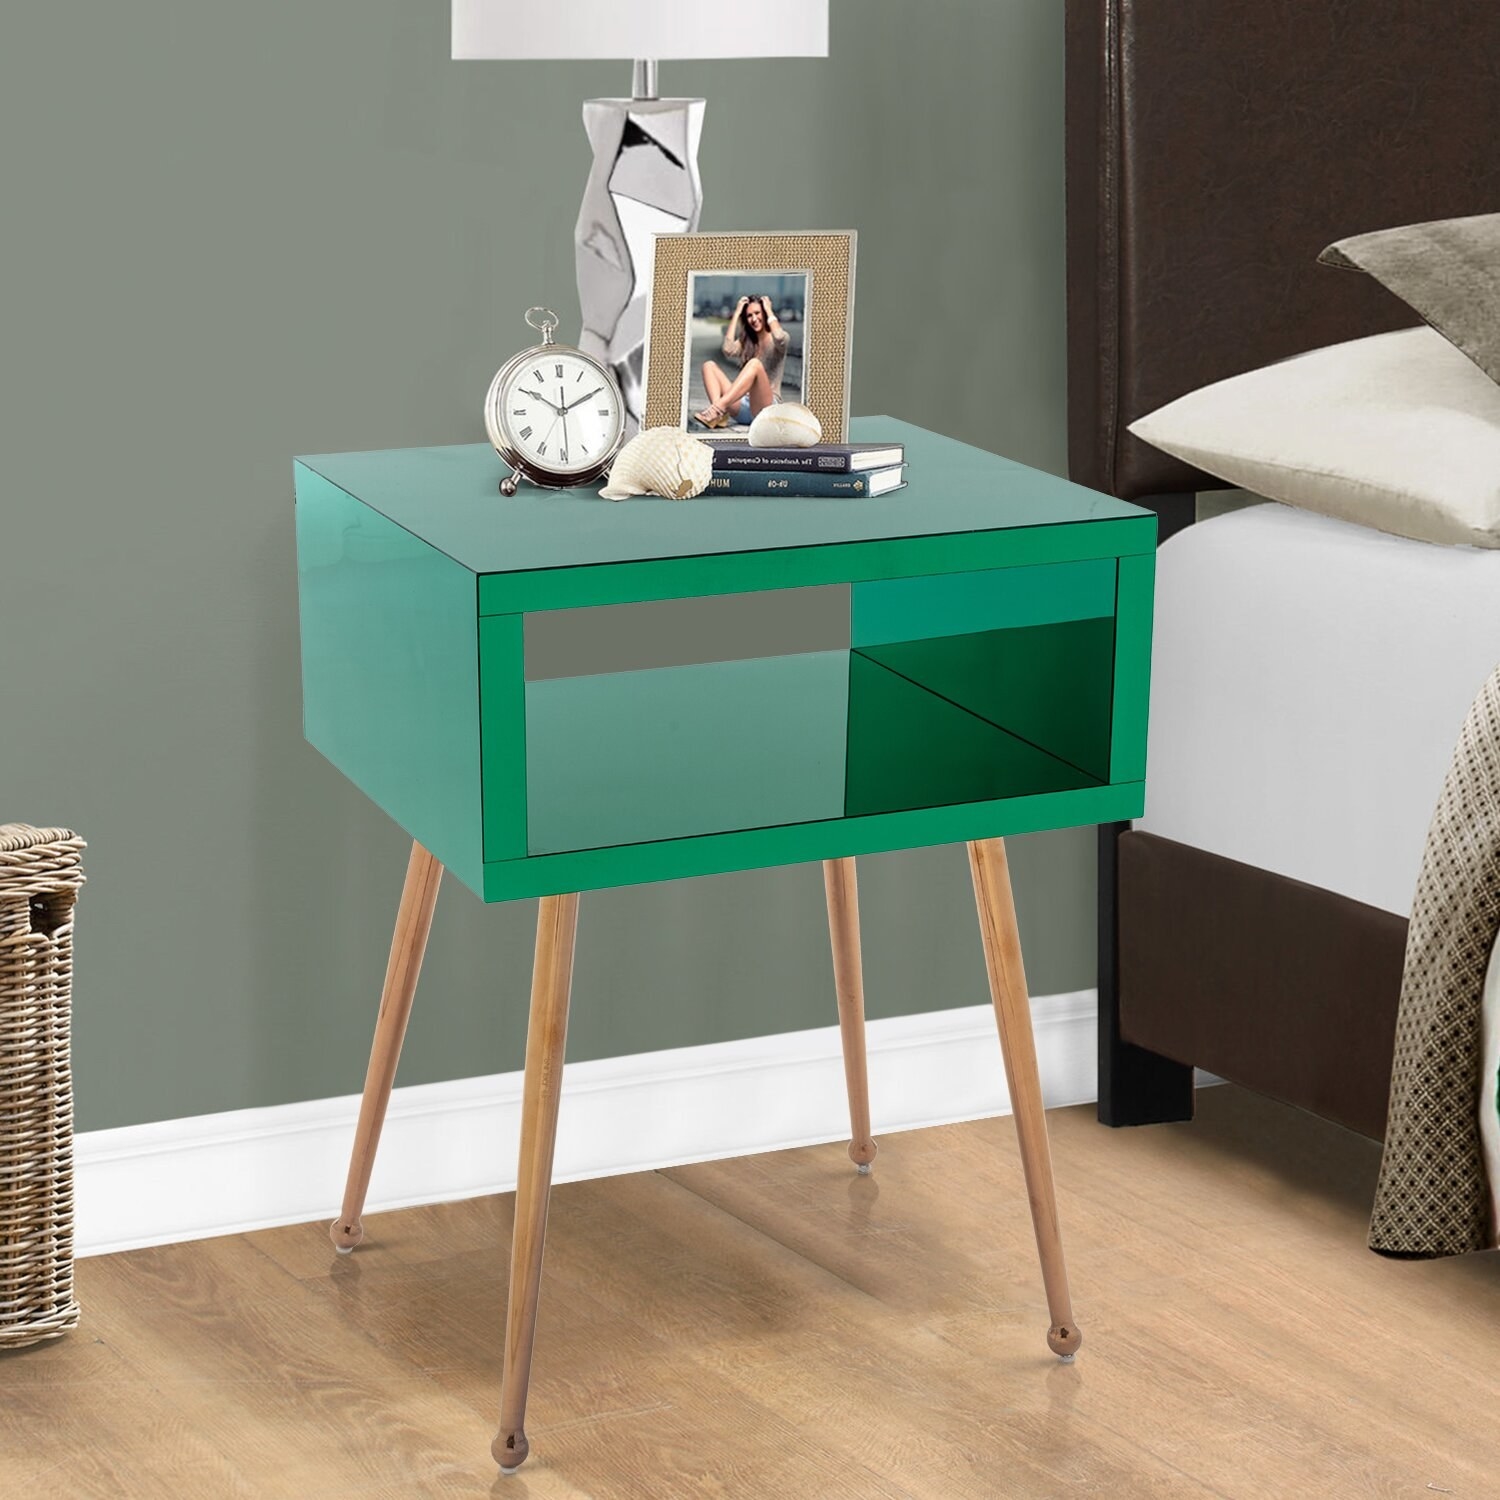 An acrylic green box that serves as side table, with legs.